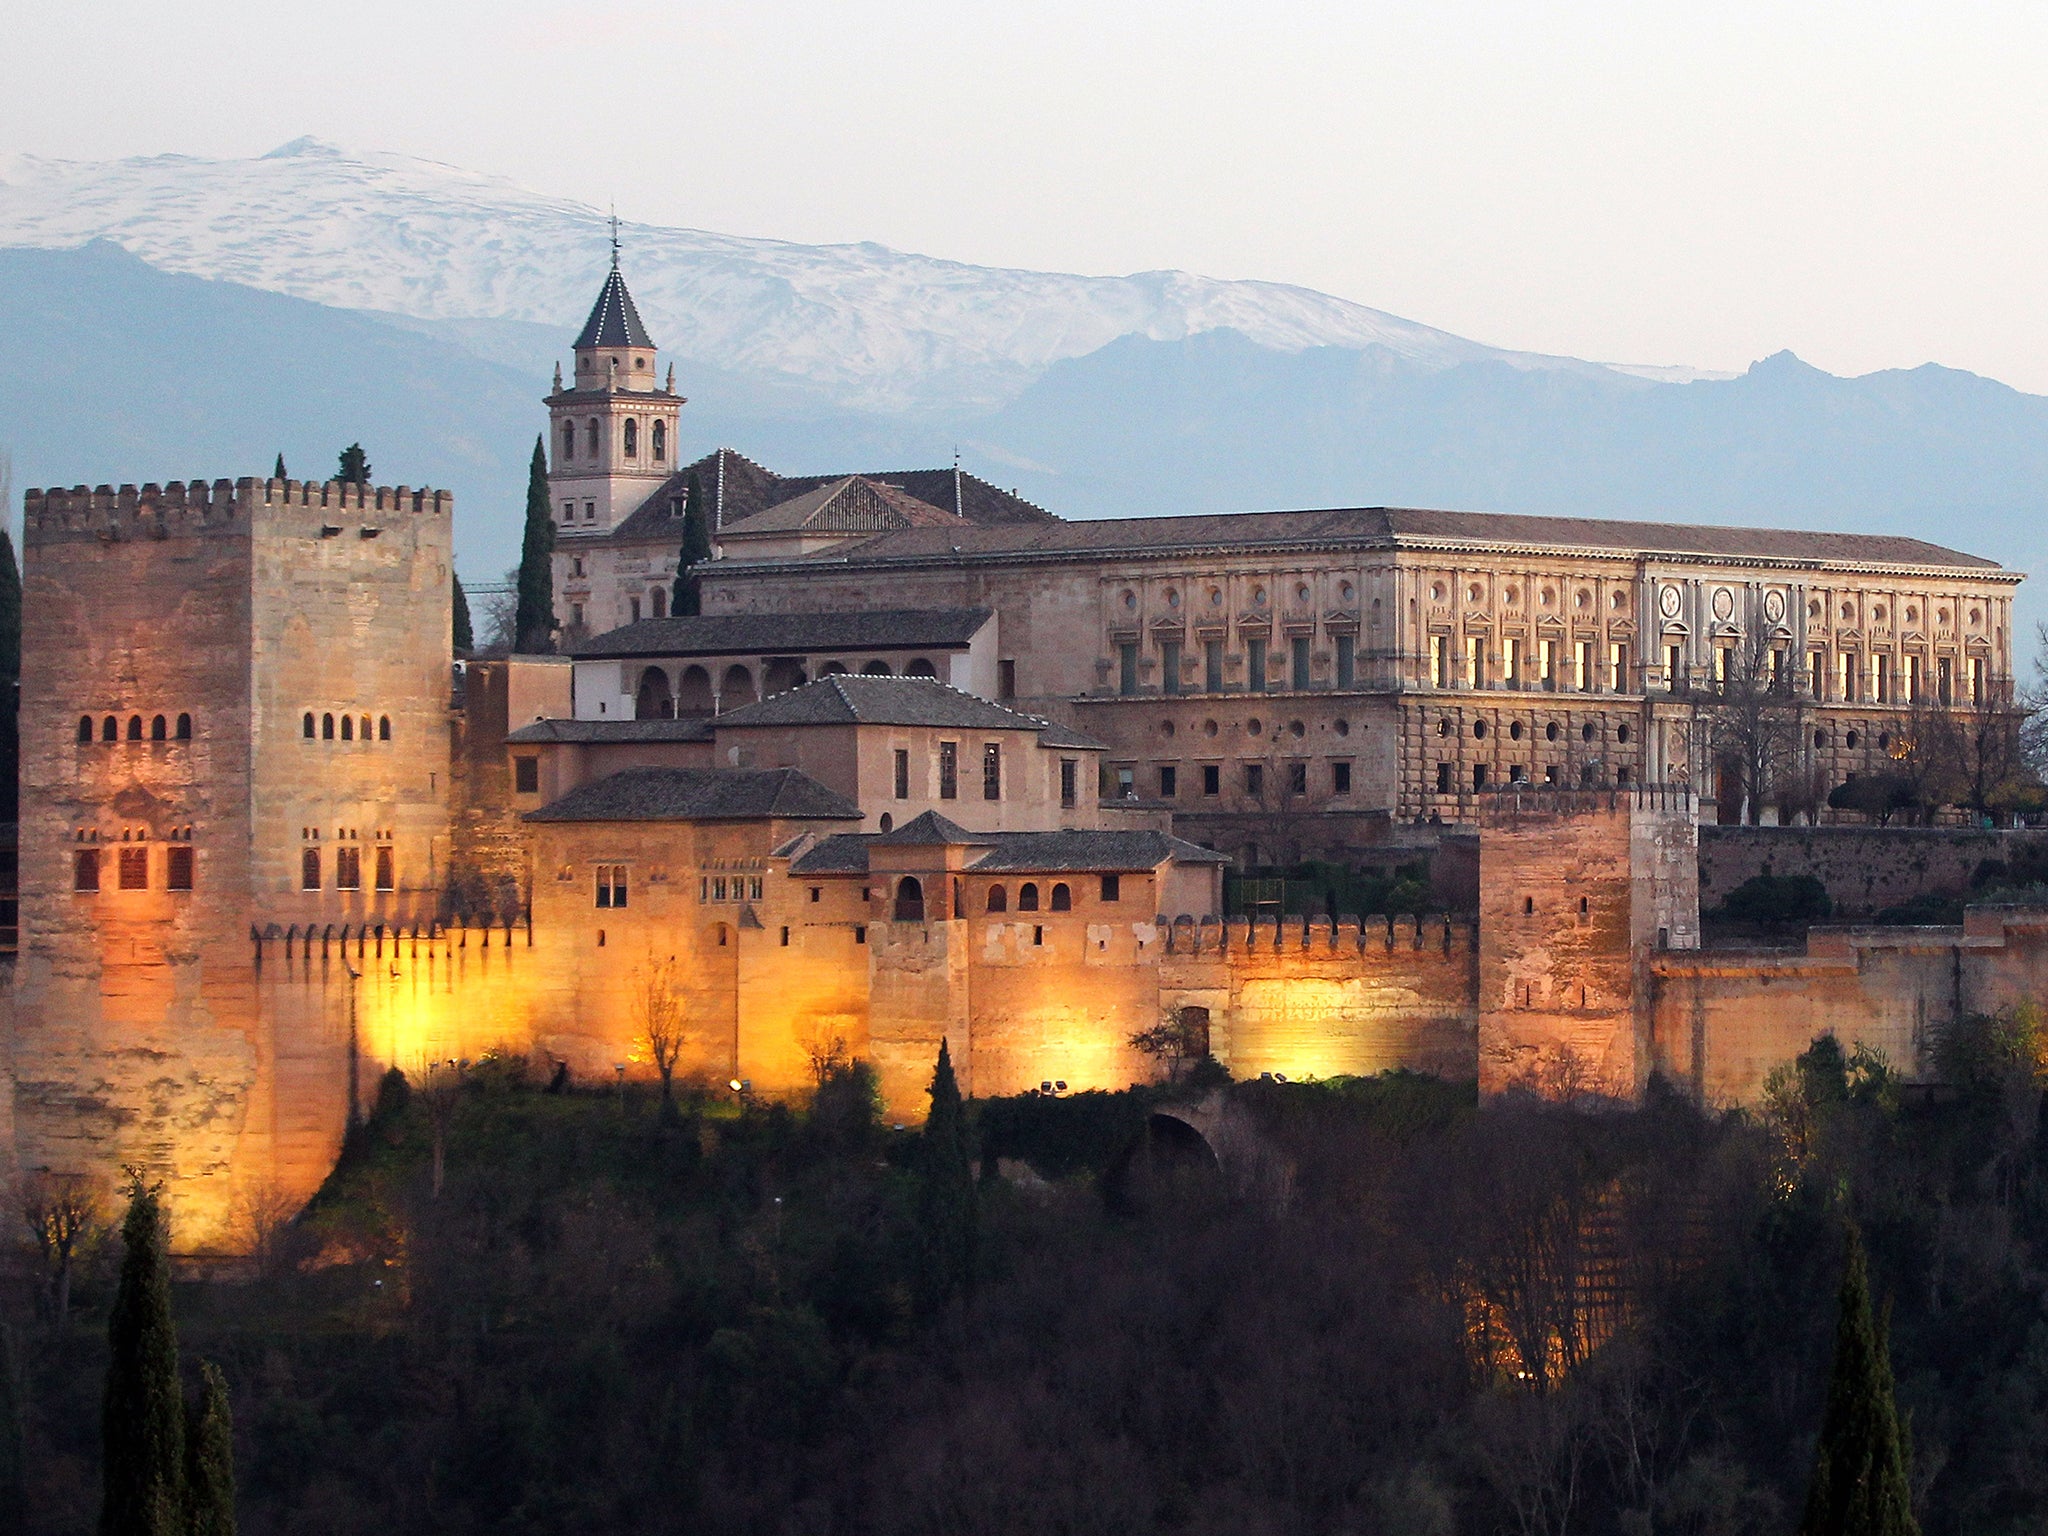 The city is known for cultural landmarks such as the
Alhambra Palace